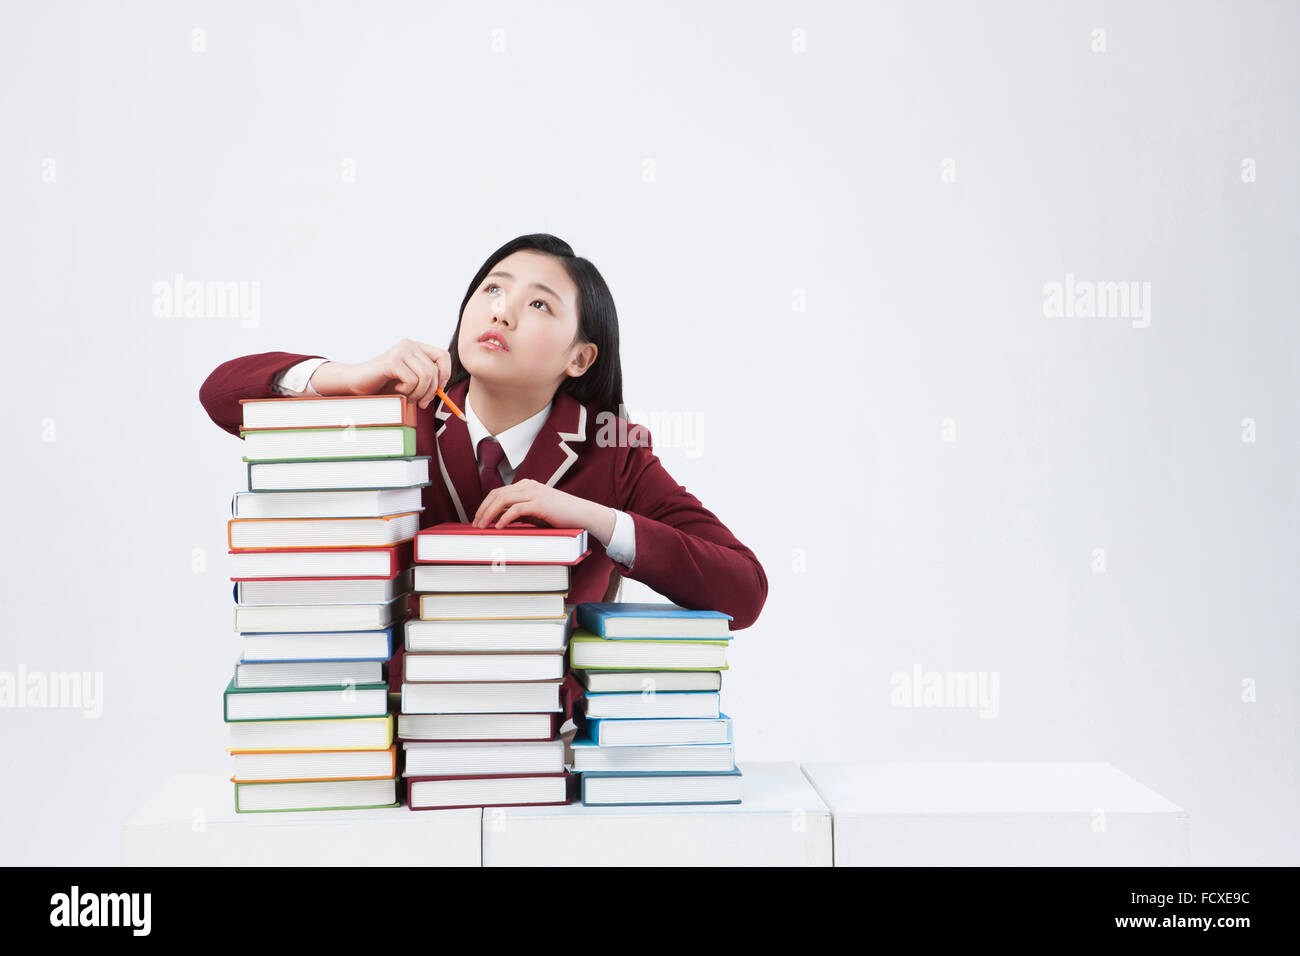 High school girl in school uniform leaning on piles of books and looking up in worried face Stock Photo